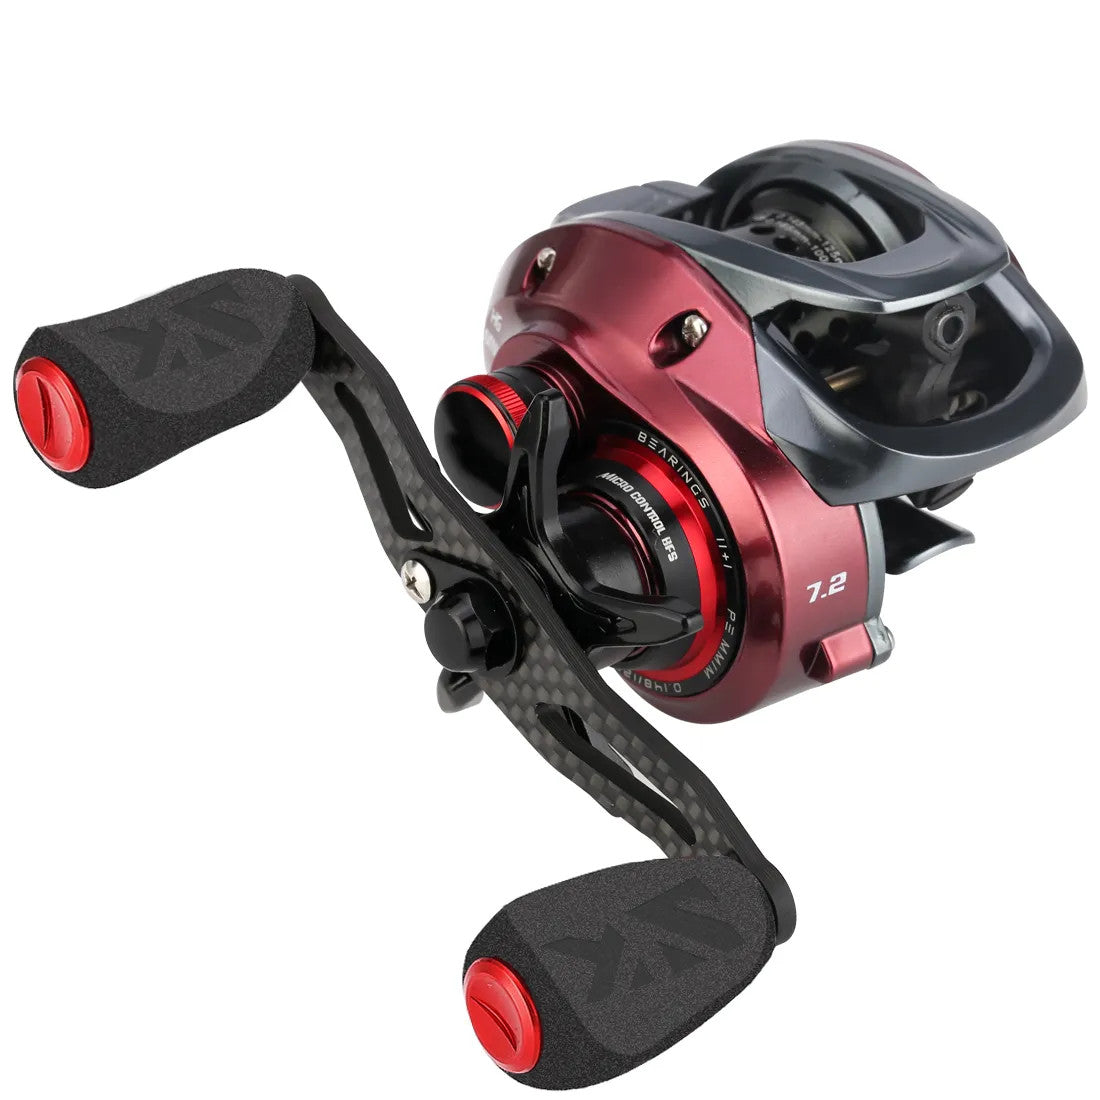 RED FOX Bait Finesse System BFS Fishing Lure Baitcasting Reel 7.2:1 8.1:1 Magnetic Brake System MAX DRAG 13lbs 162g